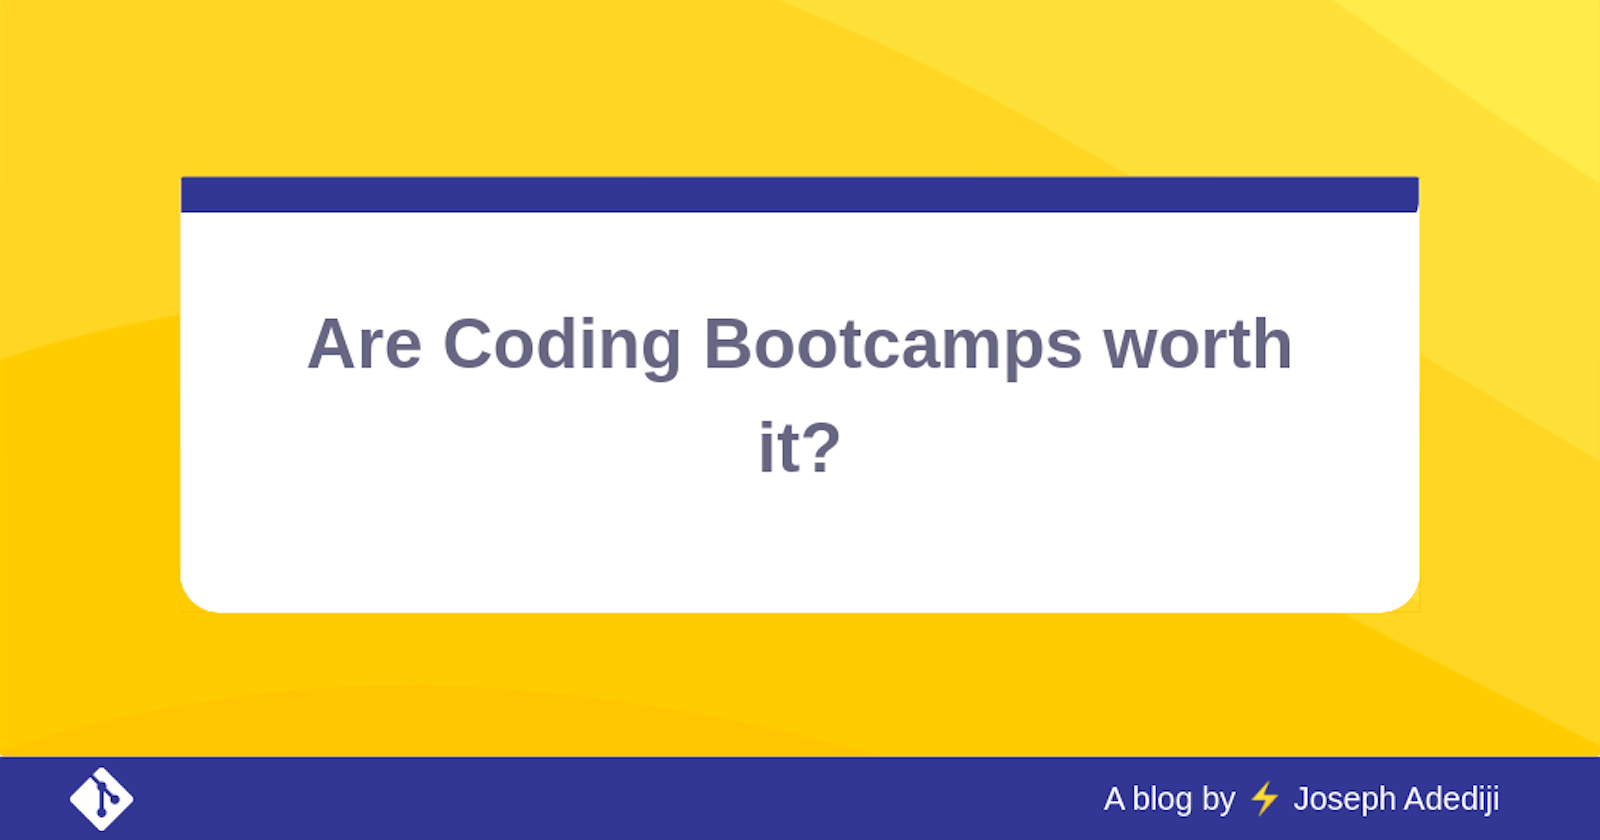 Are Coding Bootcamps worth it?